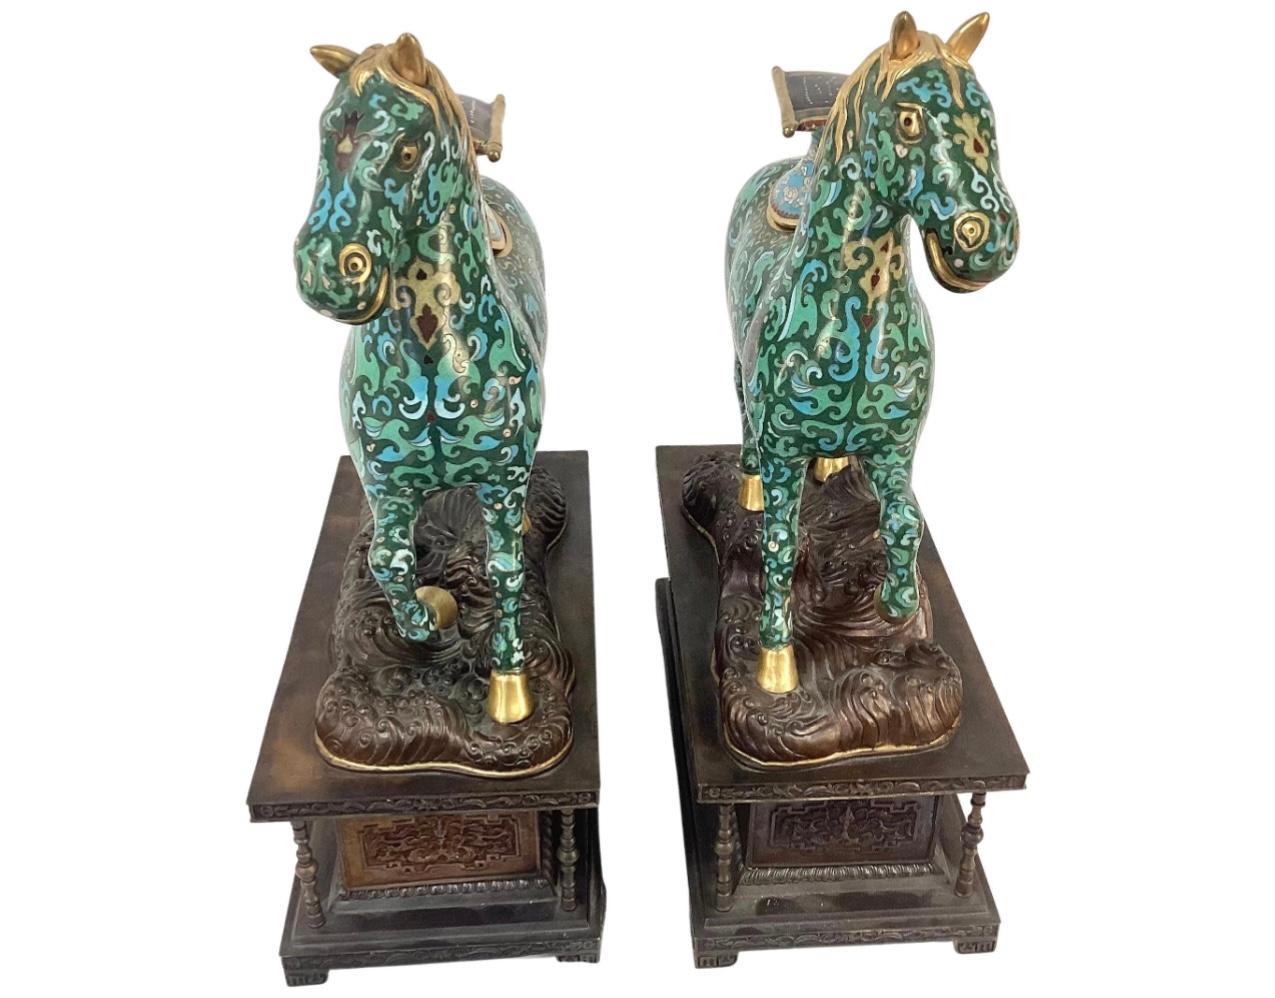 Pair of 19th century Chinese Cloisonné enamel caparison horse-form censers (incense burners) on patinated metal bases. Horses are brightly colored blue and turquoise with gold accents.